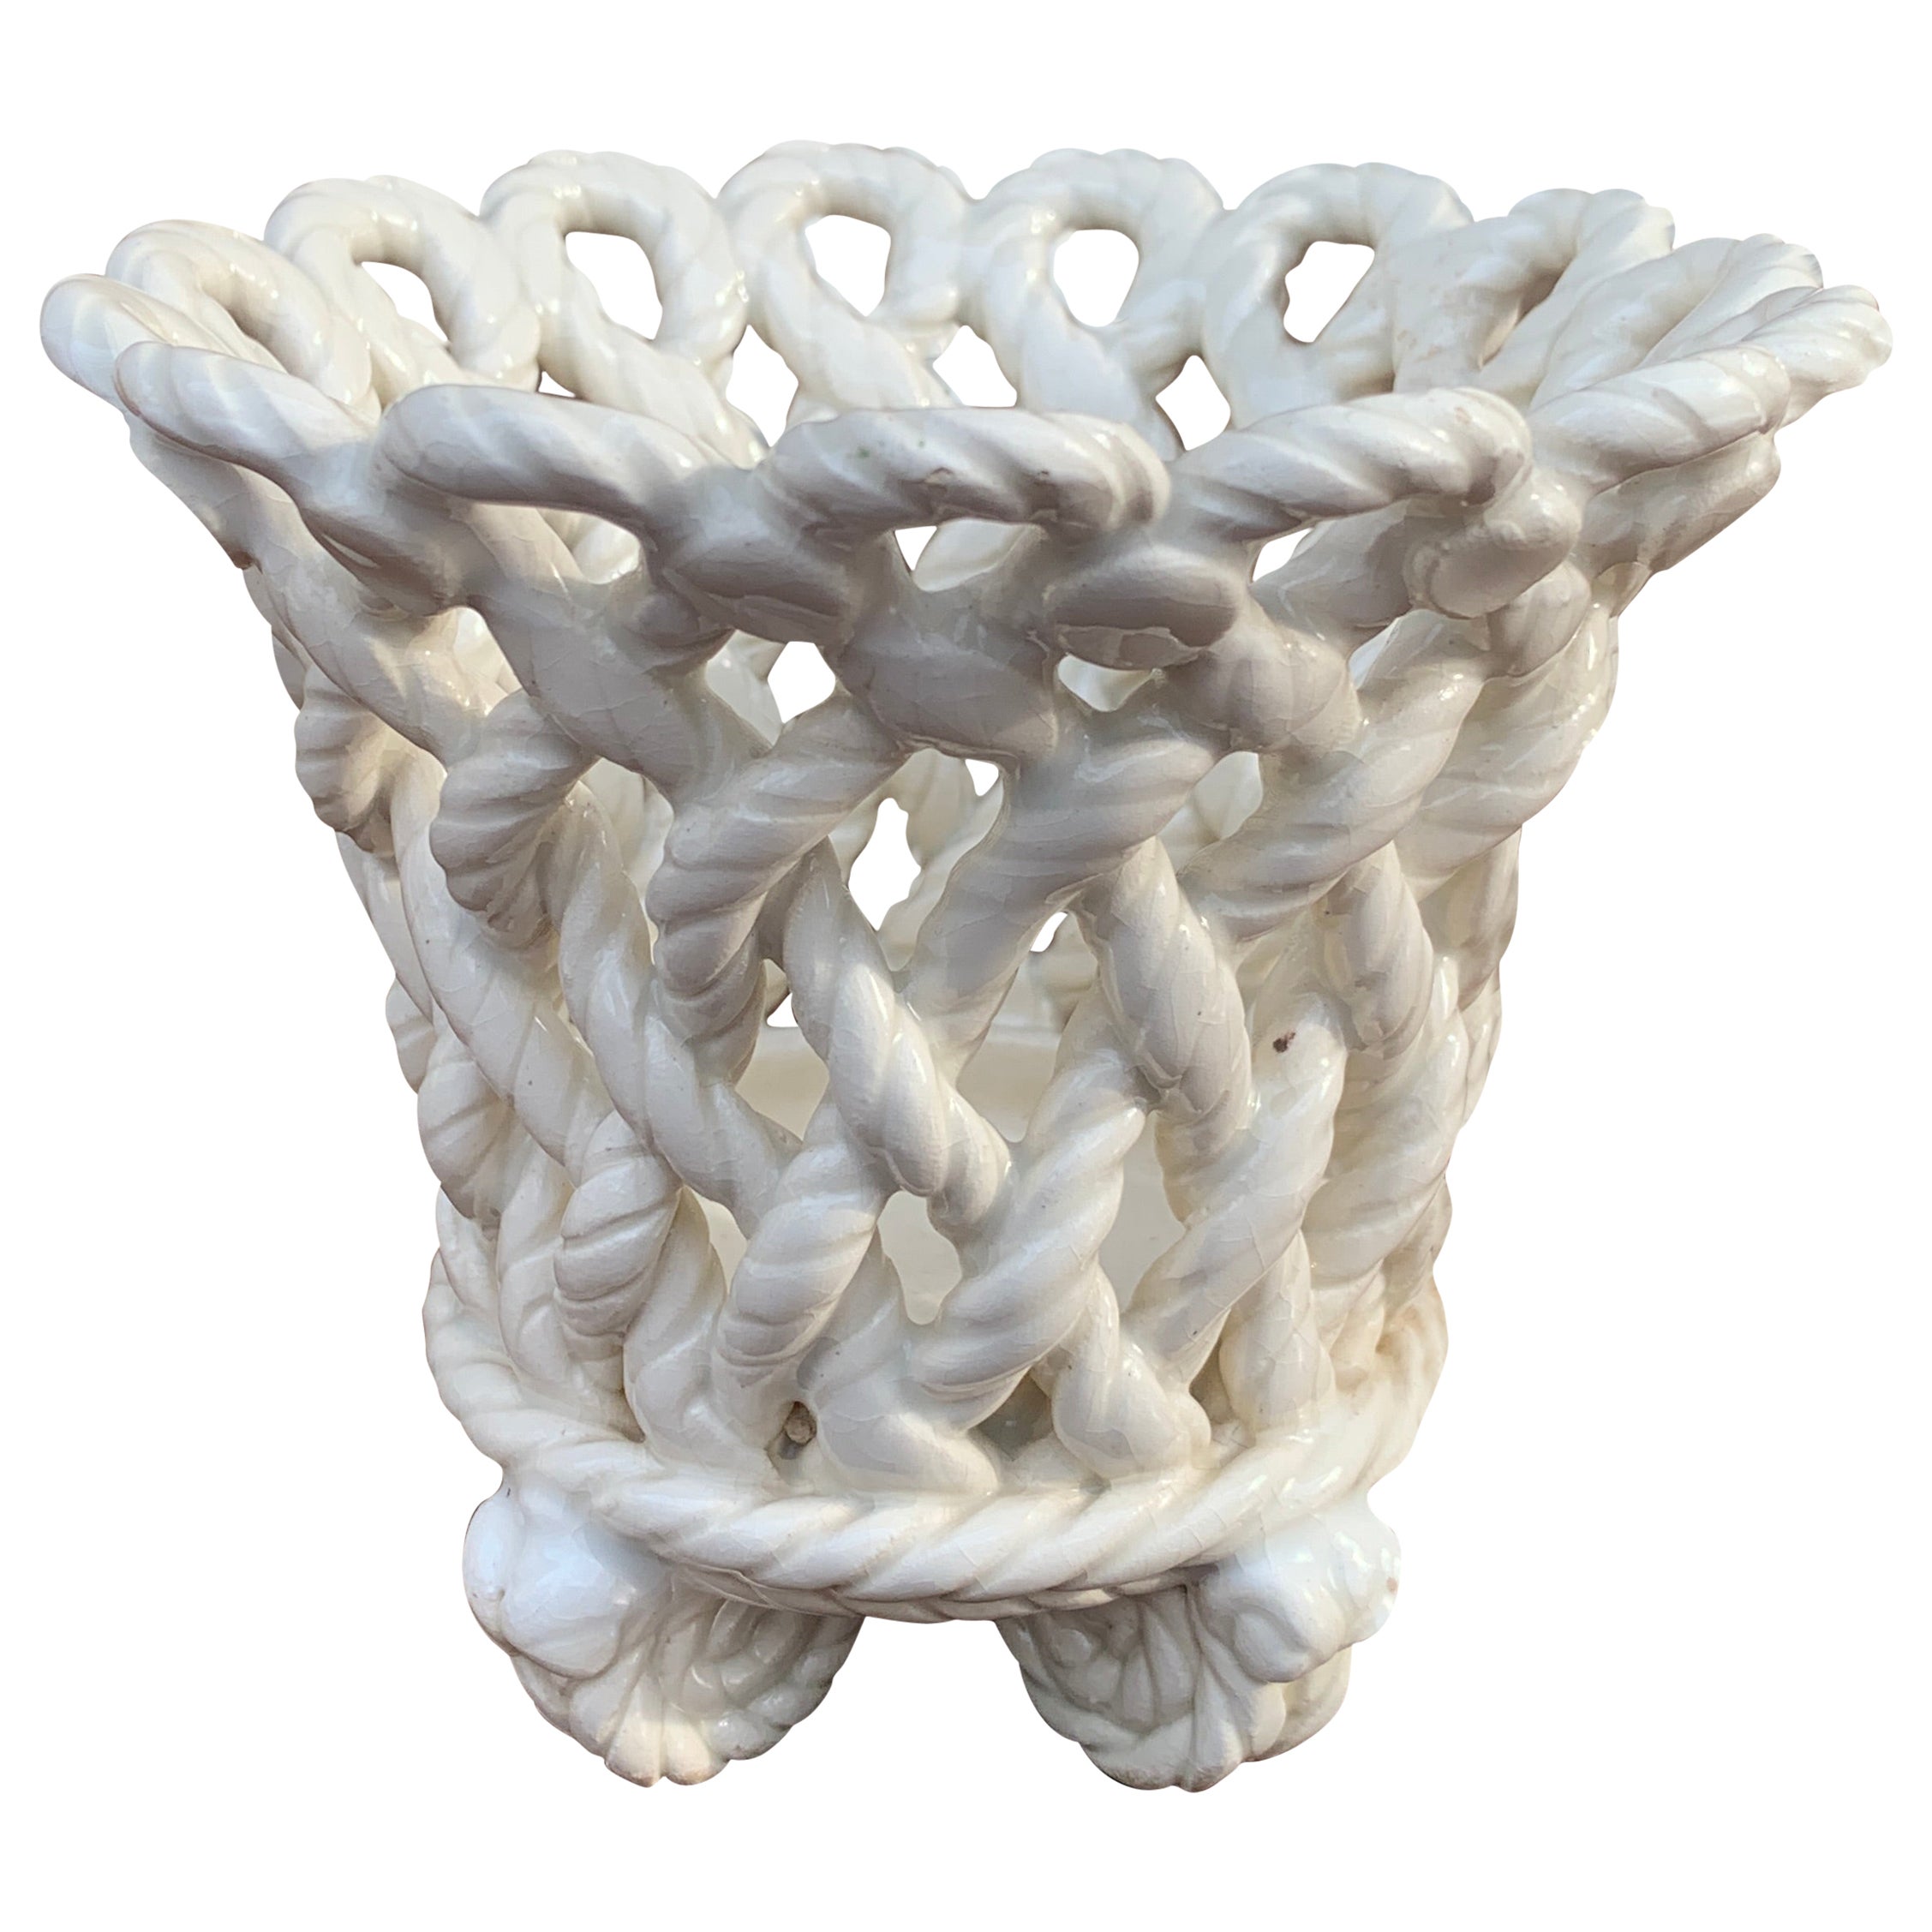 French Country White Ceramic Woven Rope Cachepot Basket For Sale